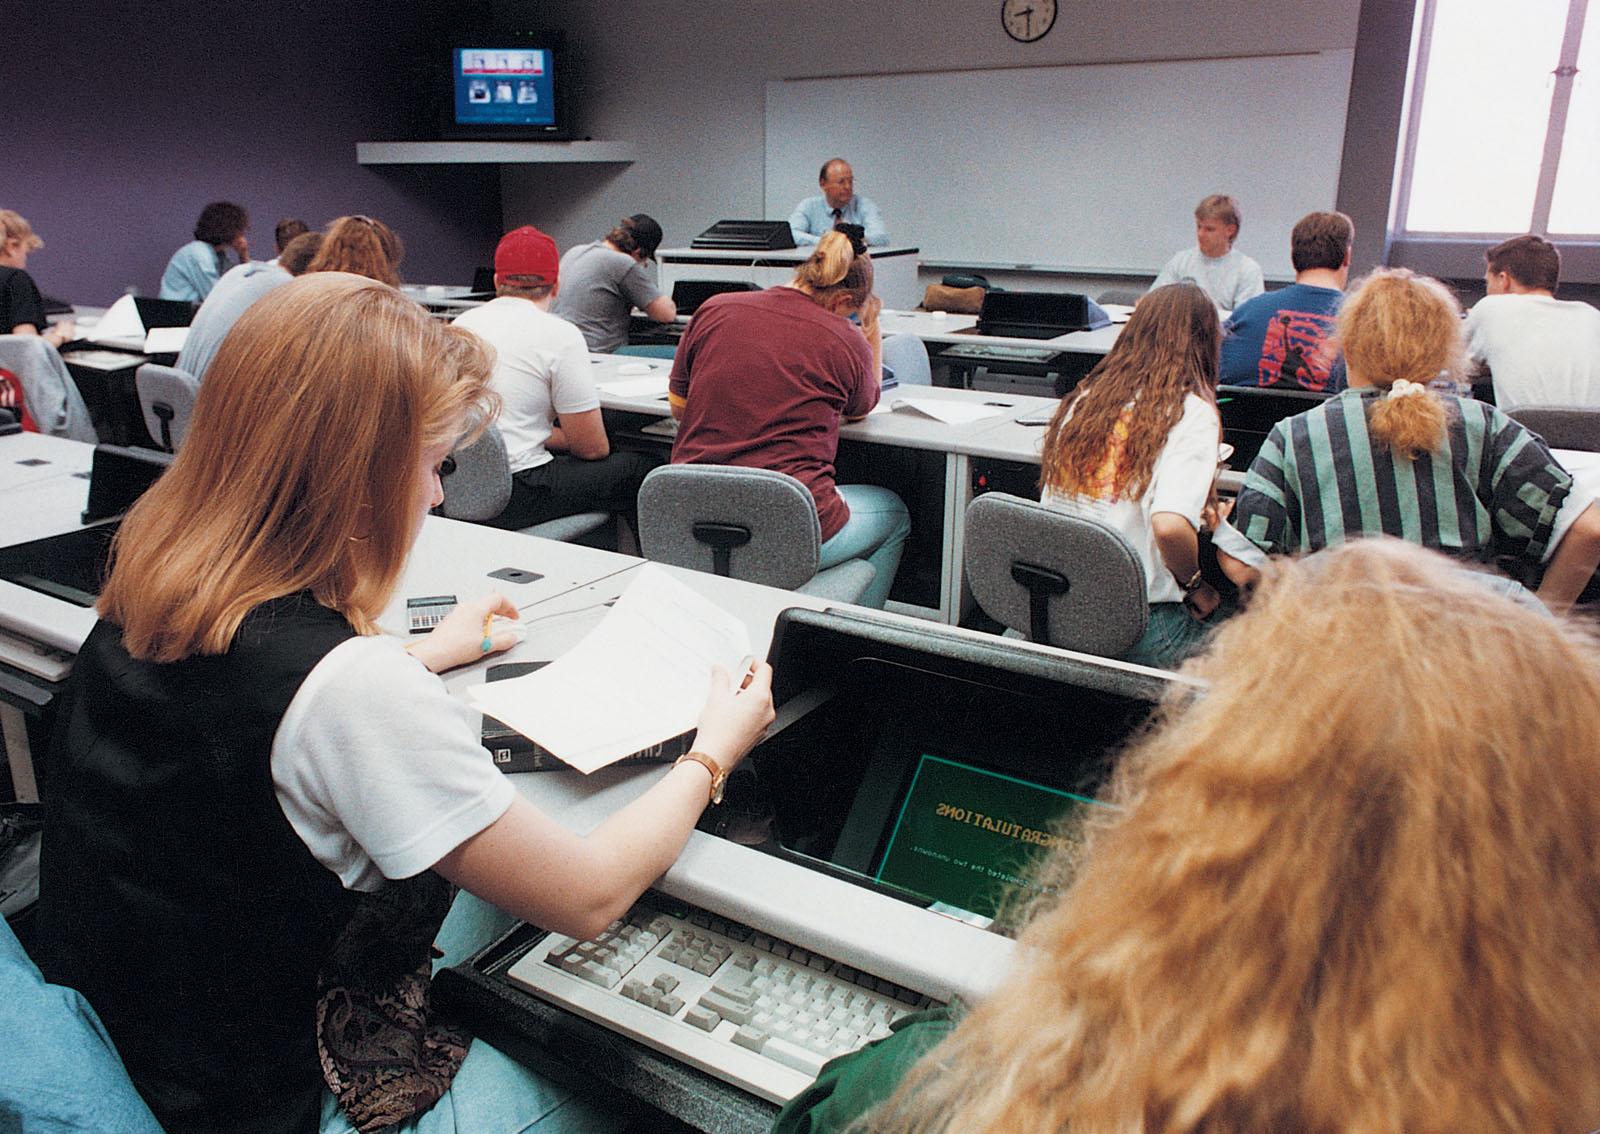 Students gathered in an early electronic classroom in the Garrett-Strong Science Building with Dr. Harlan Higginbotham teaching a general chemistry course.